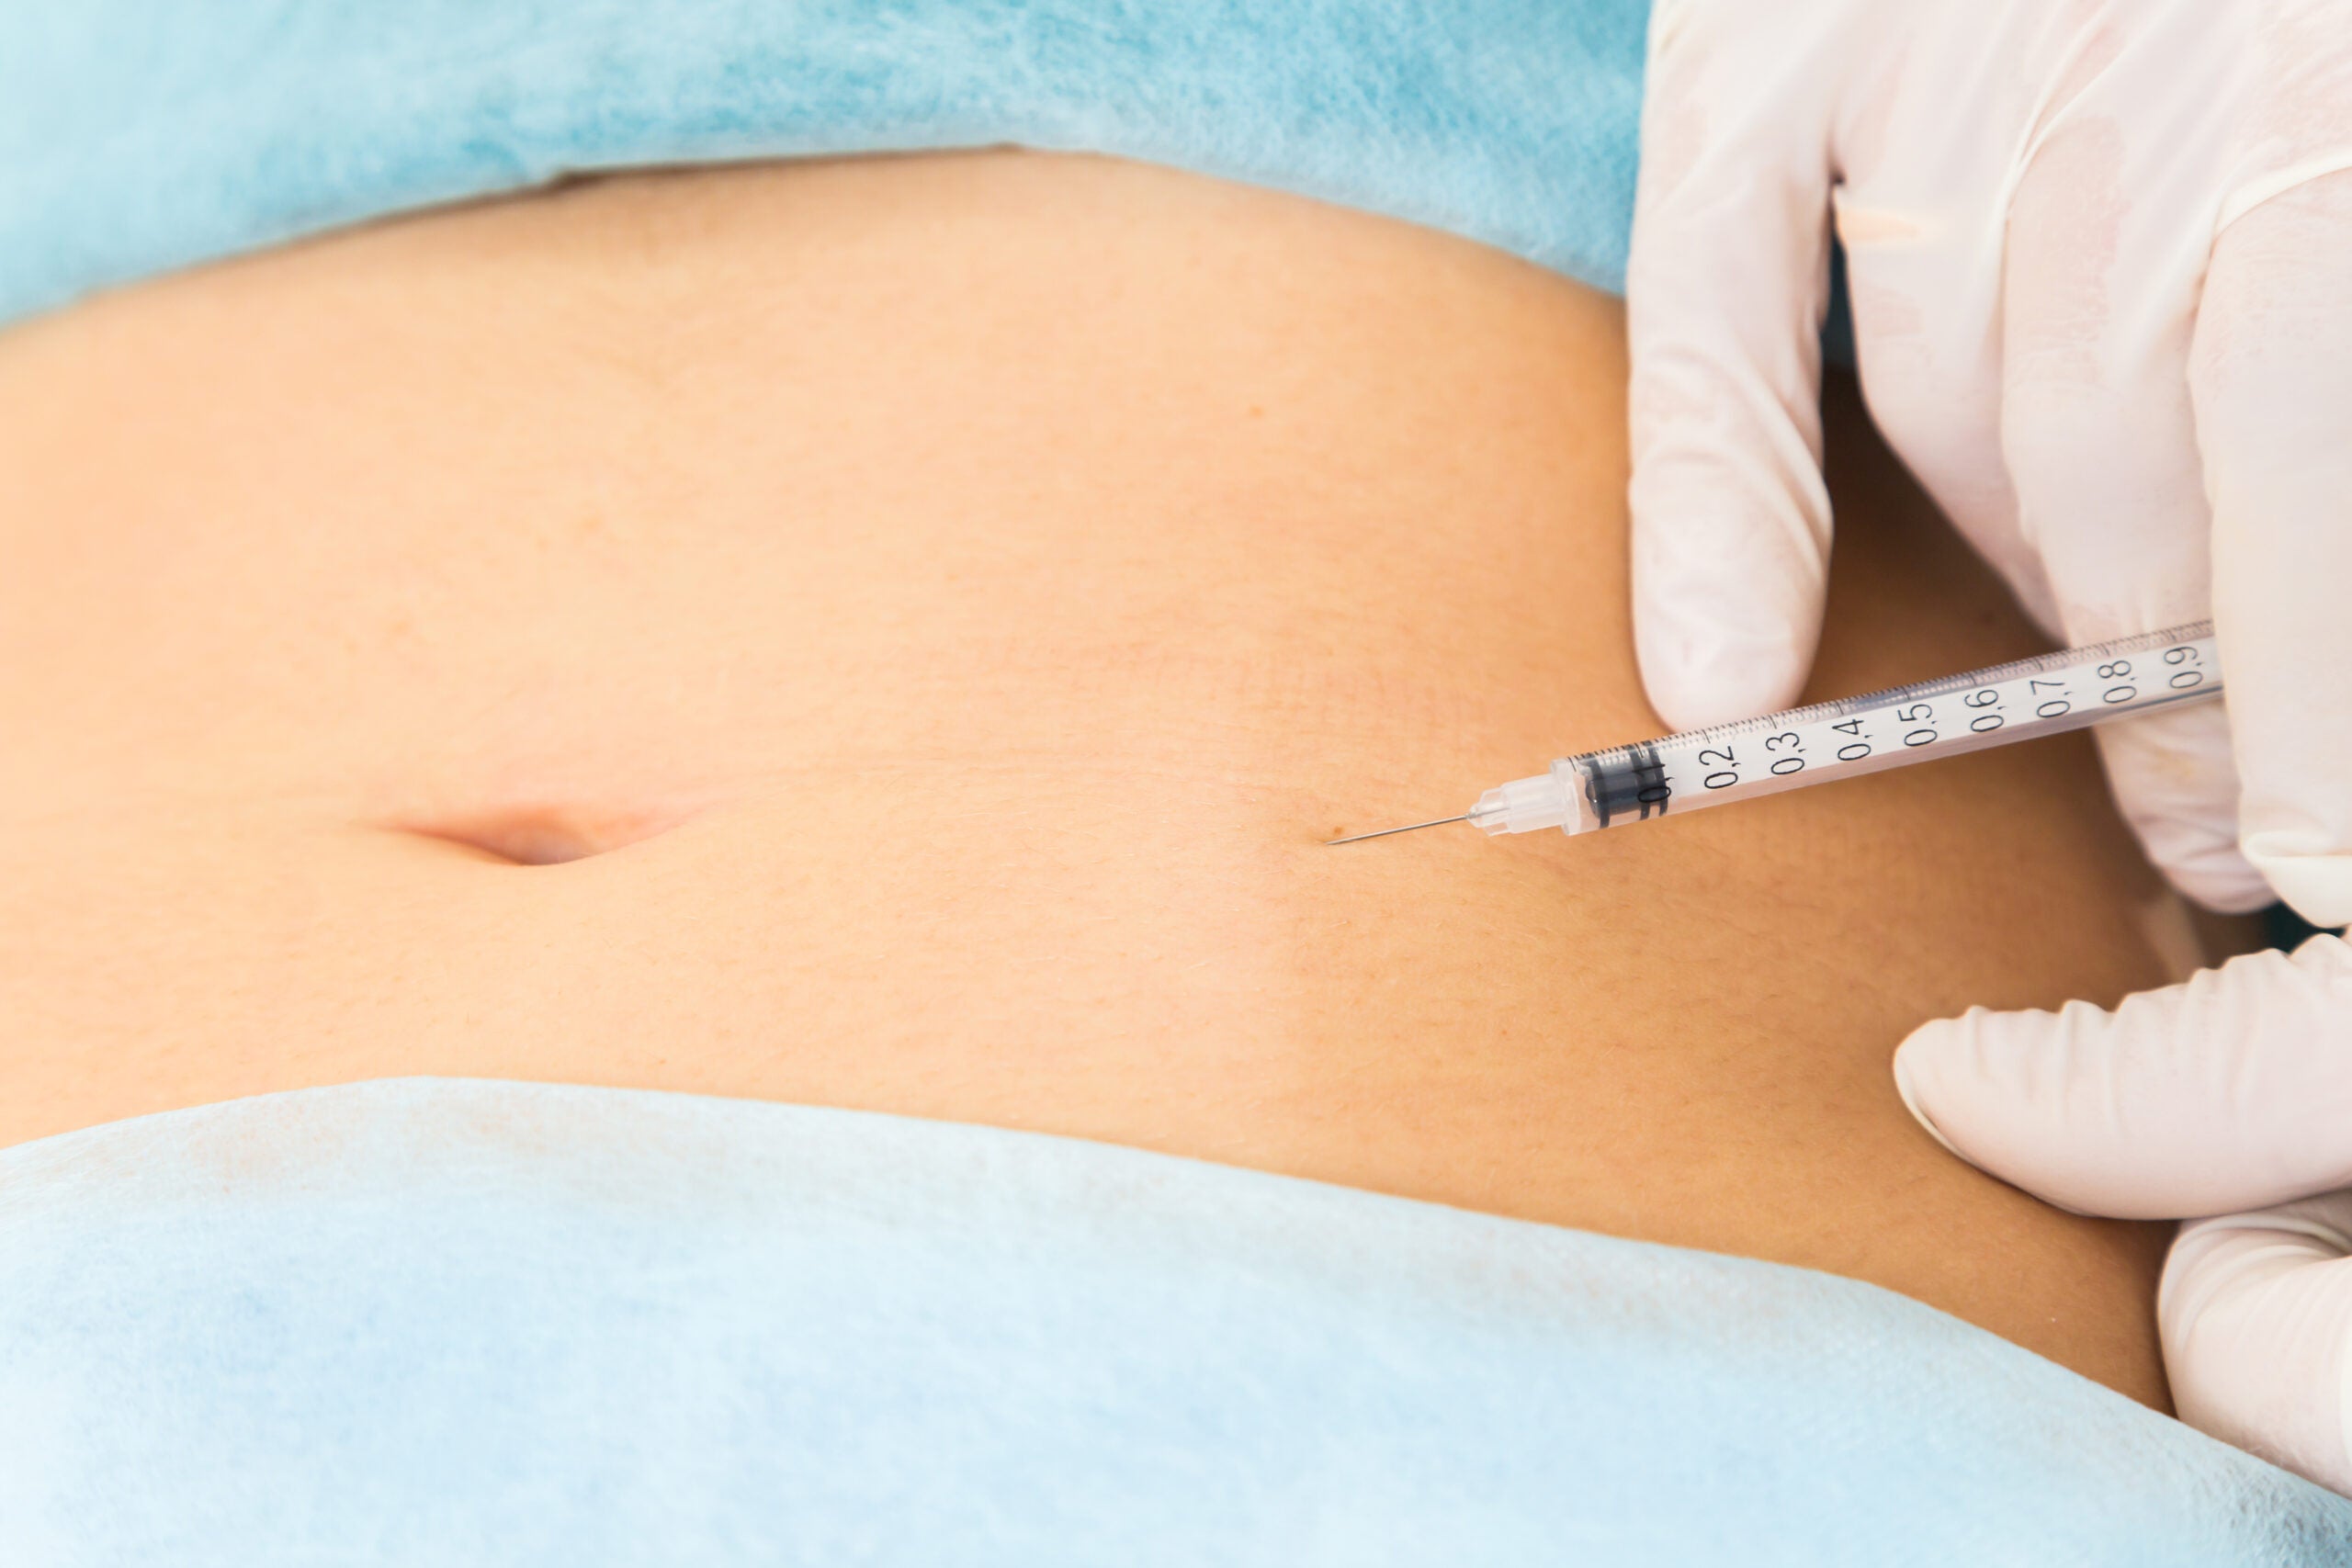 Carbon dioxide injections might seem better than liposuction—but there’s a catch